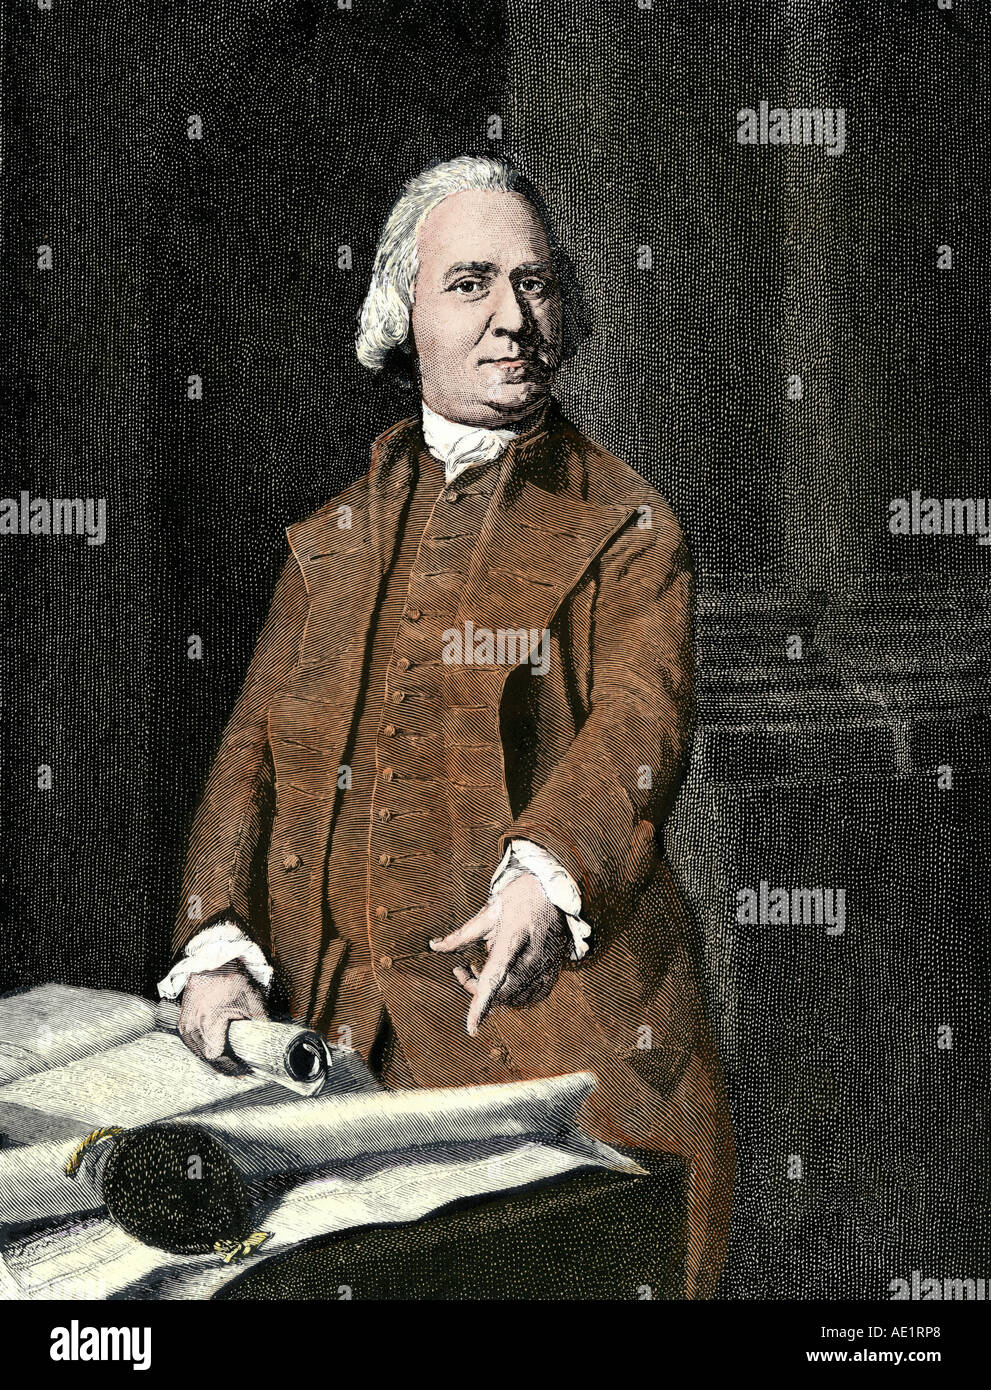 Samuel Adams a leader of the Sons of Liberty in Massachusetts before the Revolutionary War. Hand-colored woodcut Stock Photo